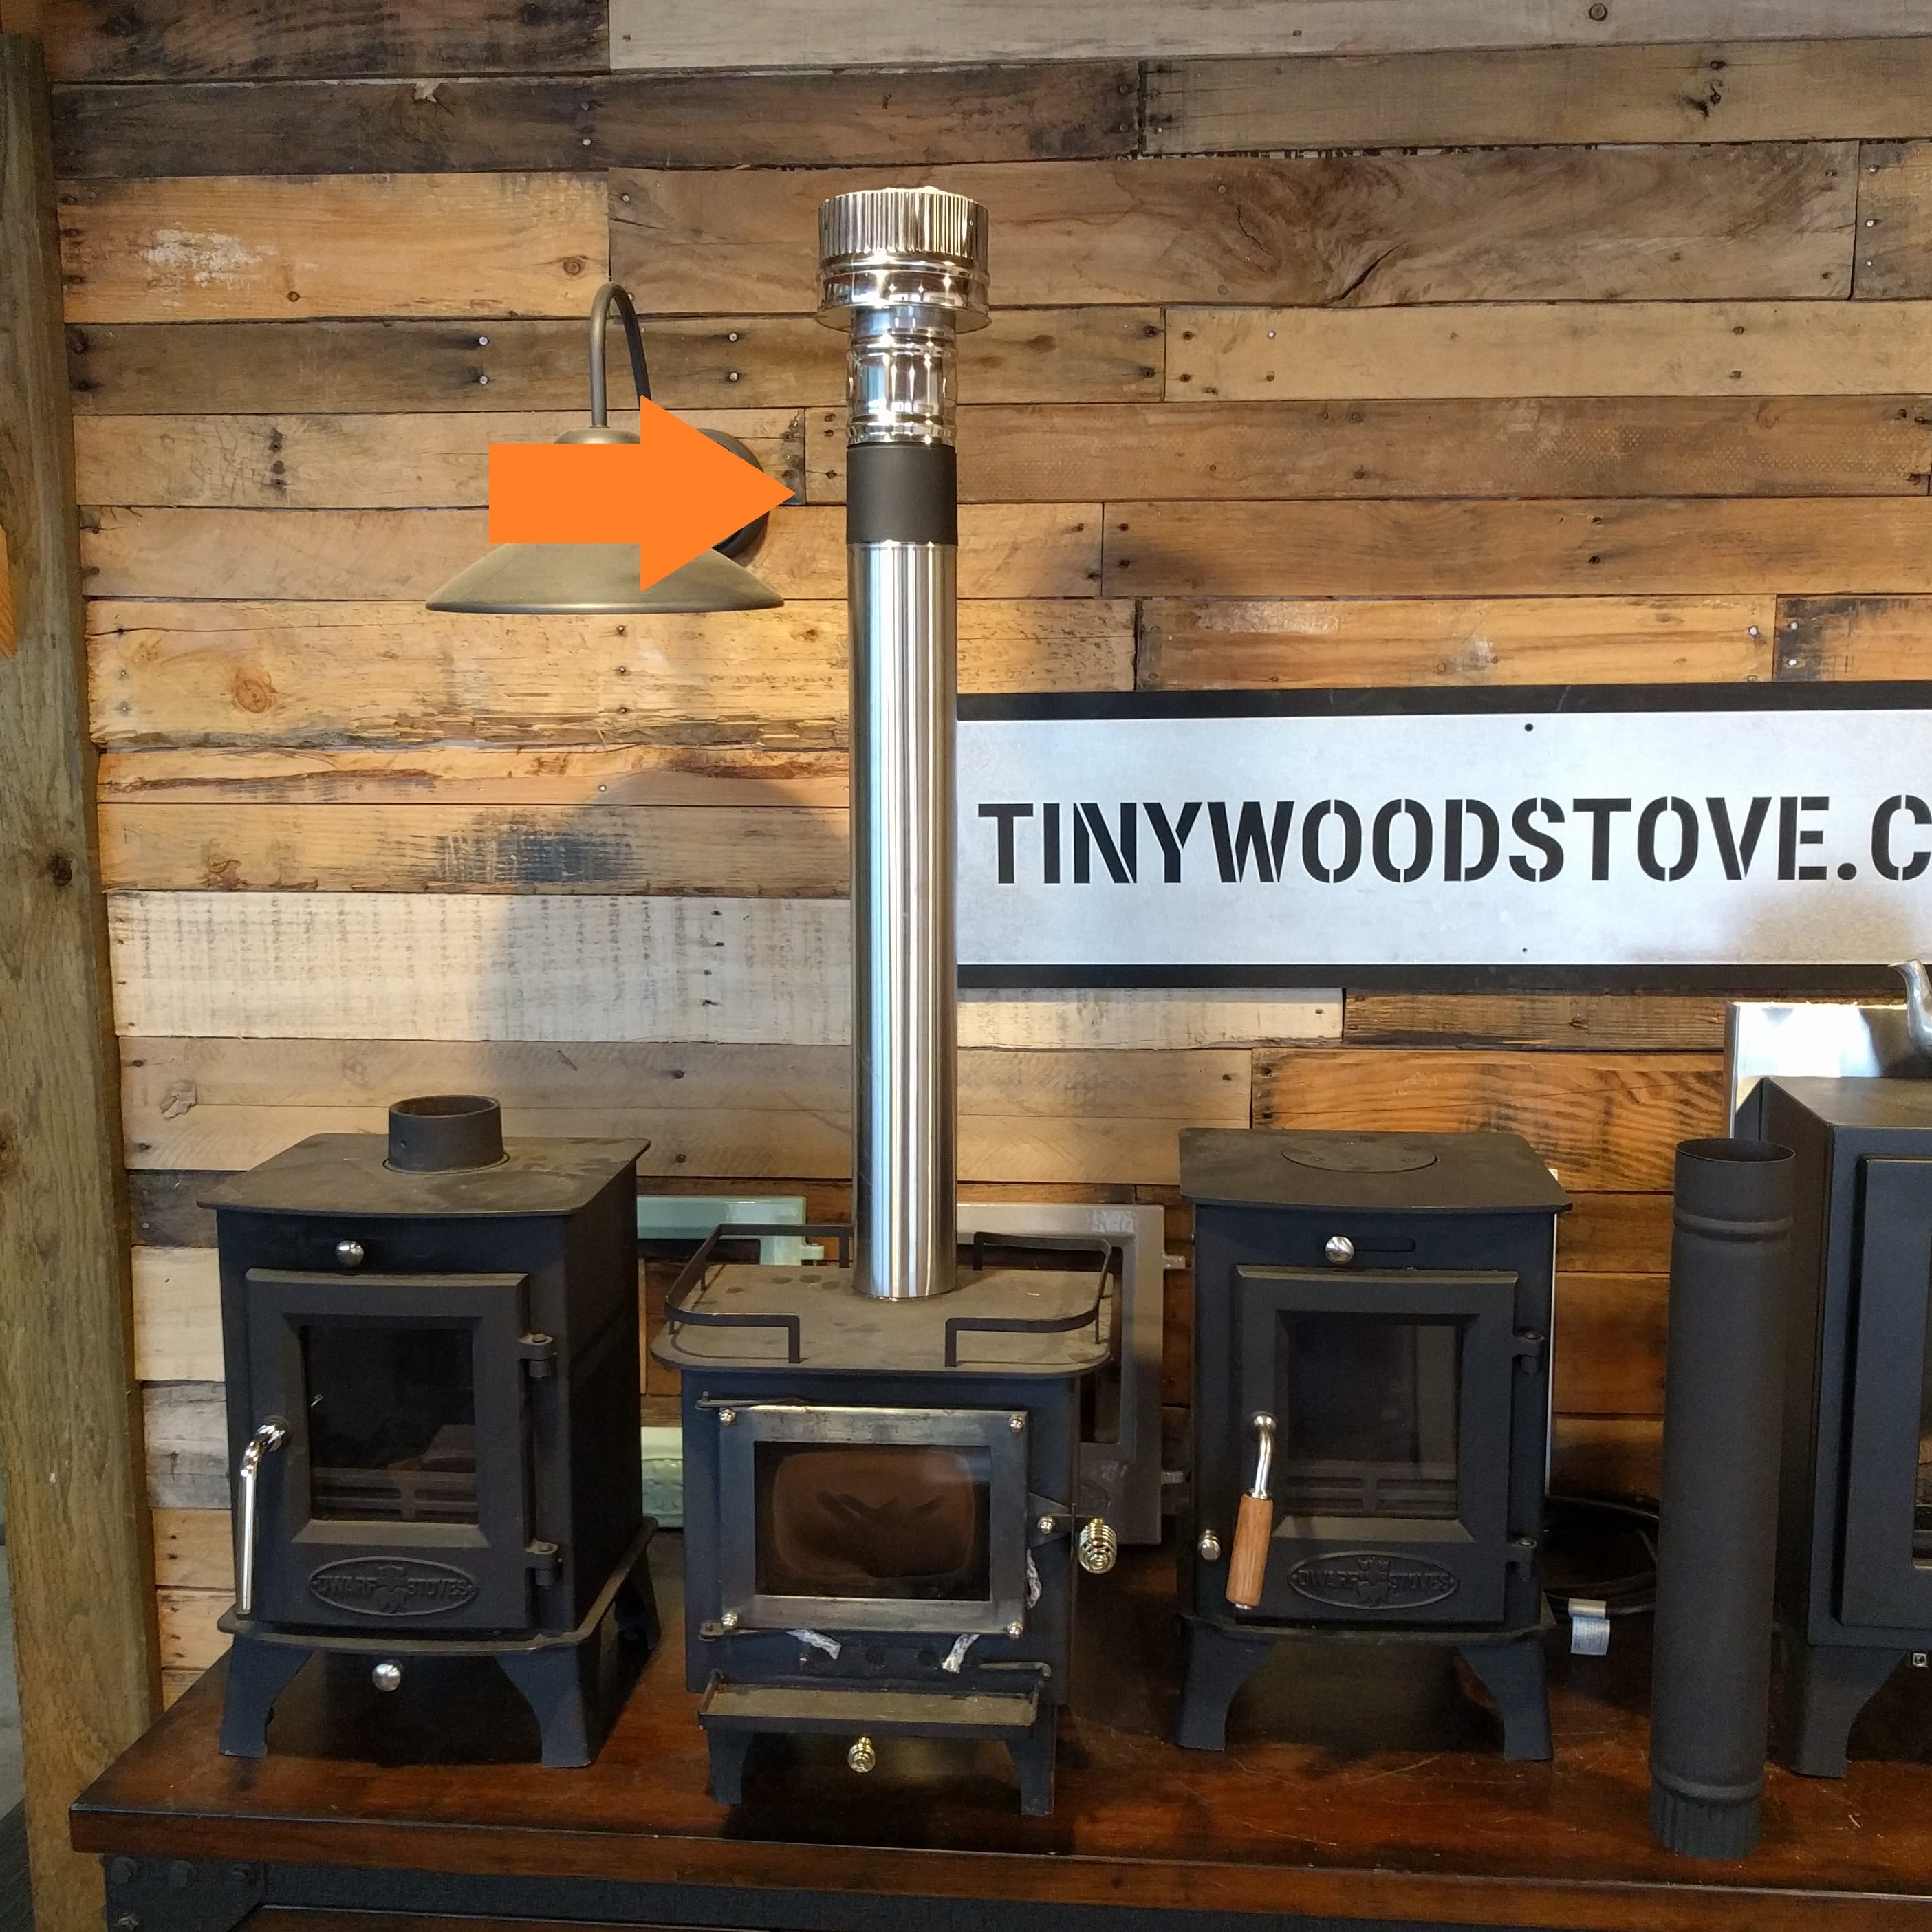 30 Off Cubic Mini Wood Stoves Promo Codes 6 Verified Coupons August 2020